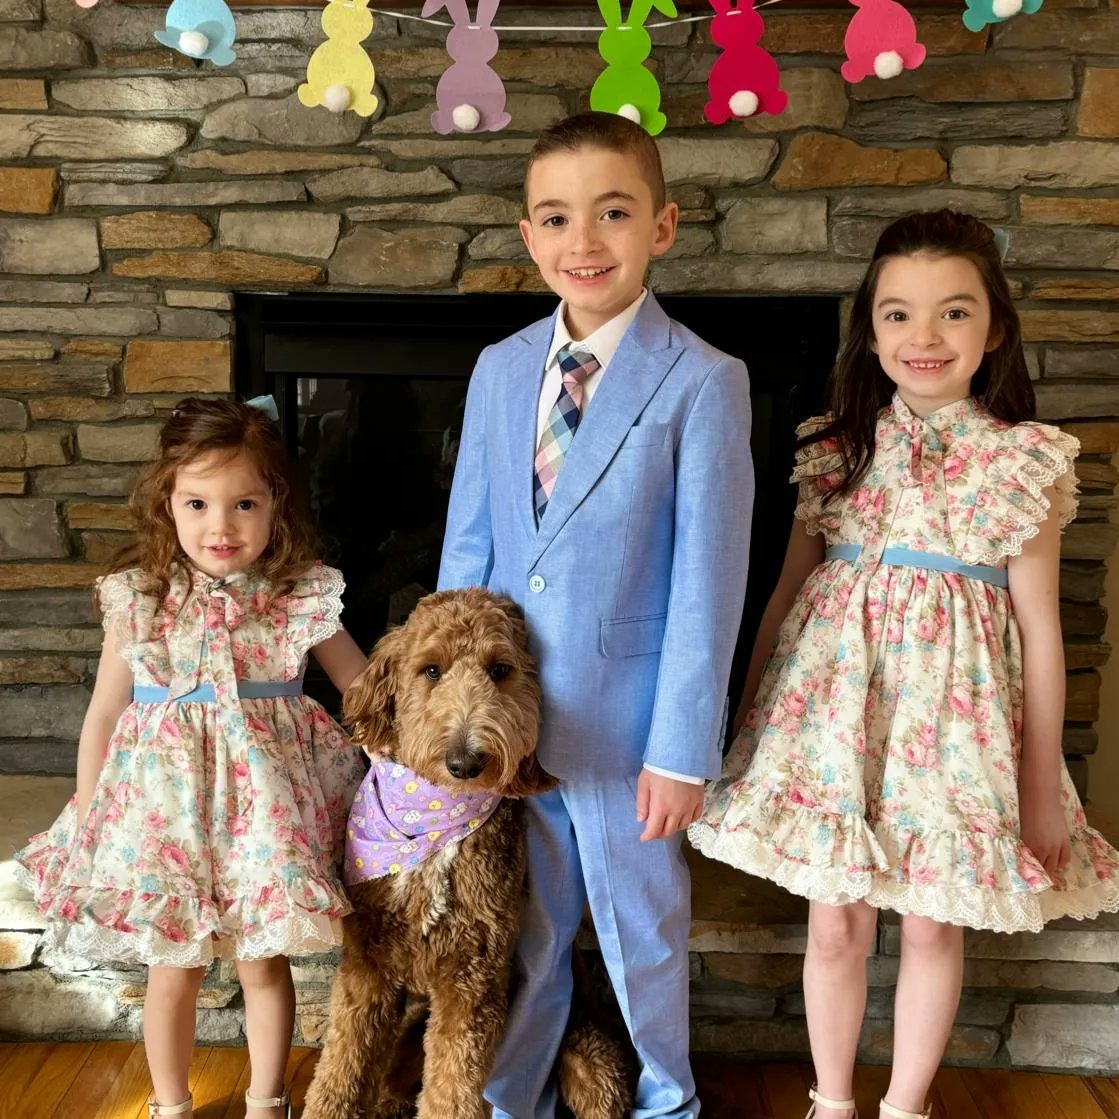 Easter Blessings from our family to yours!